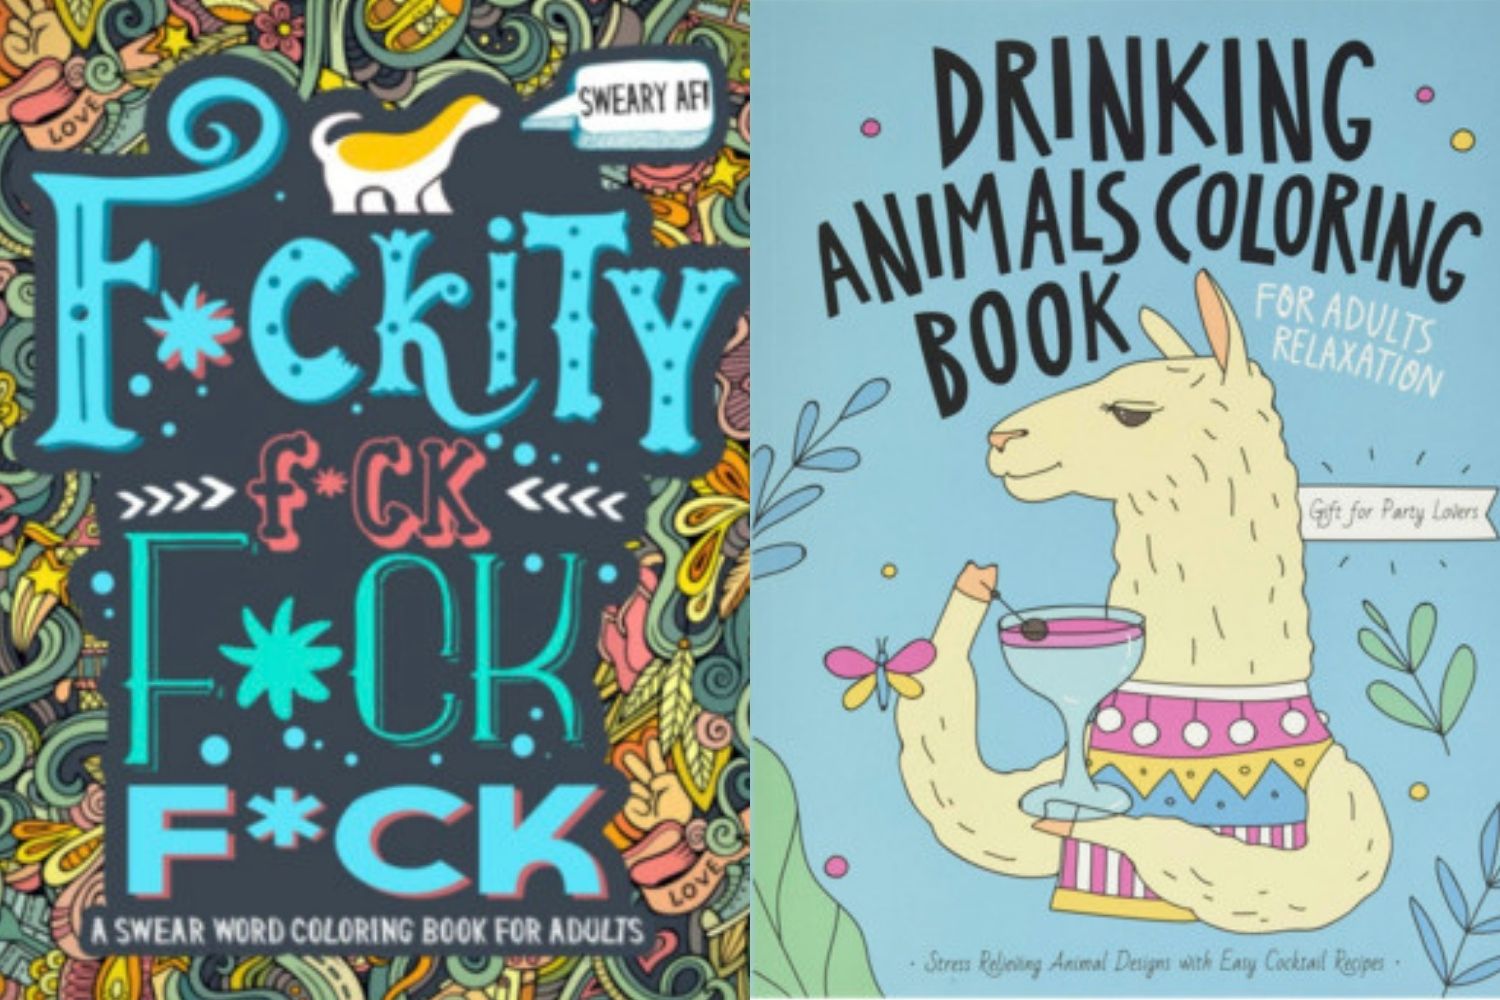 The 21 Wildest Adult Coloring Books for Stress Relief   Let's Eat Cake